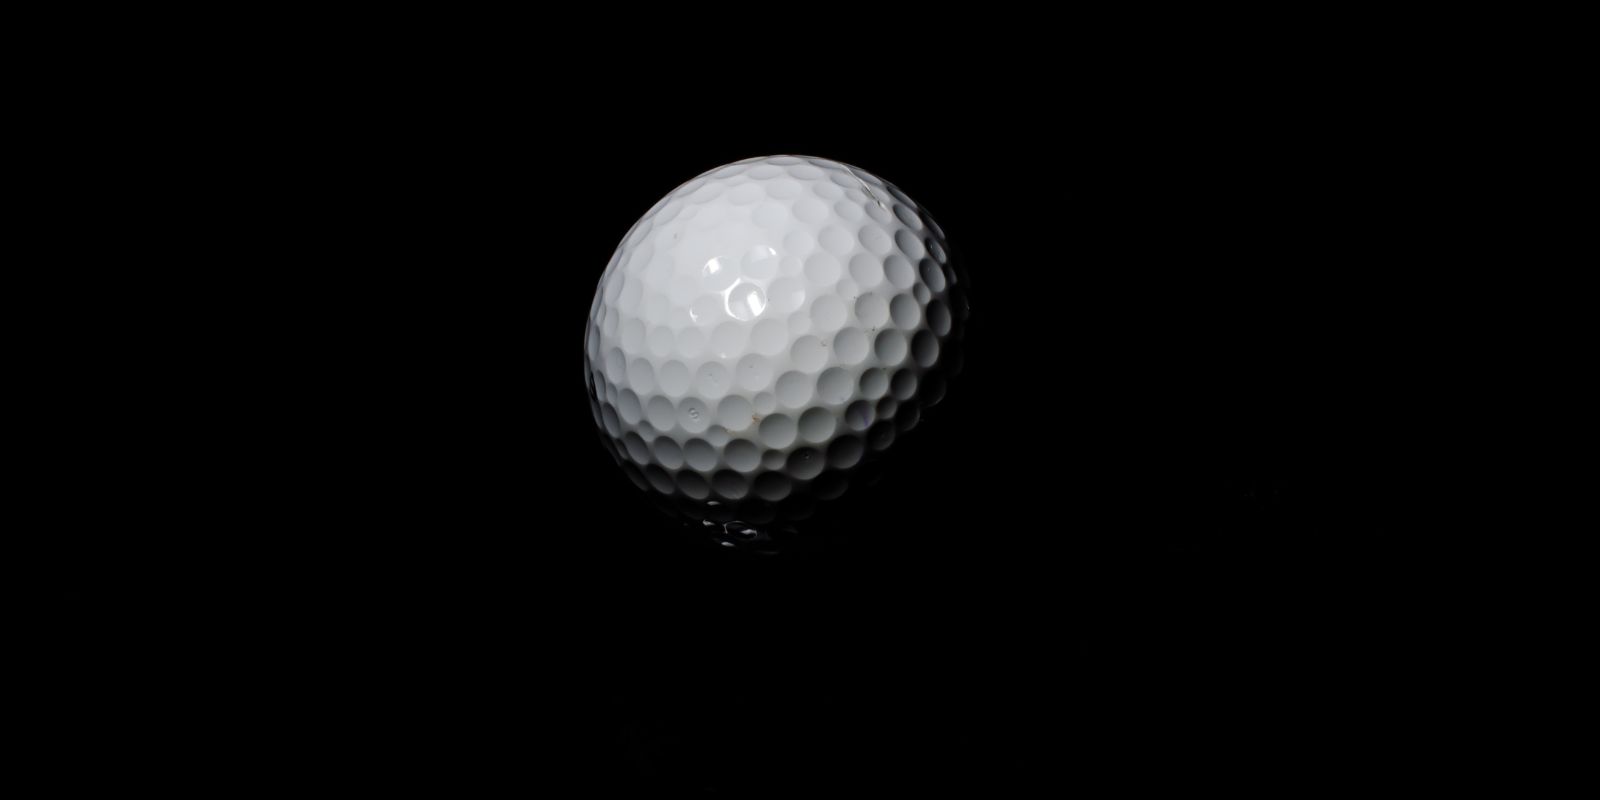 February 6th: The First Golf Ball Hit On The Moon